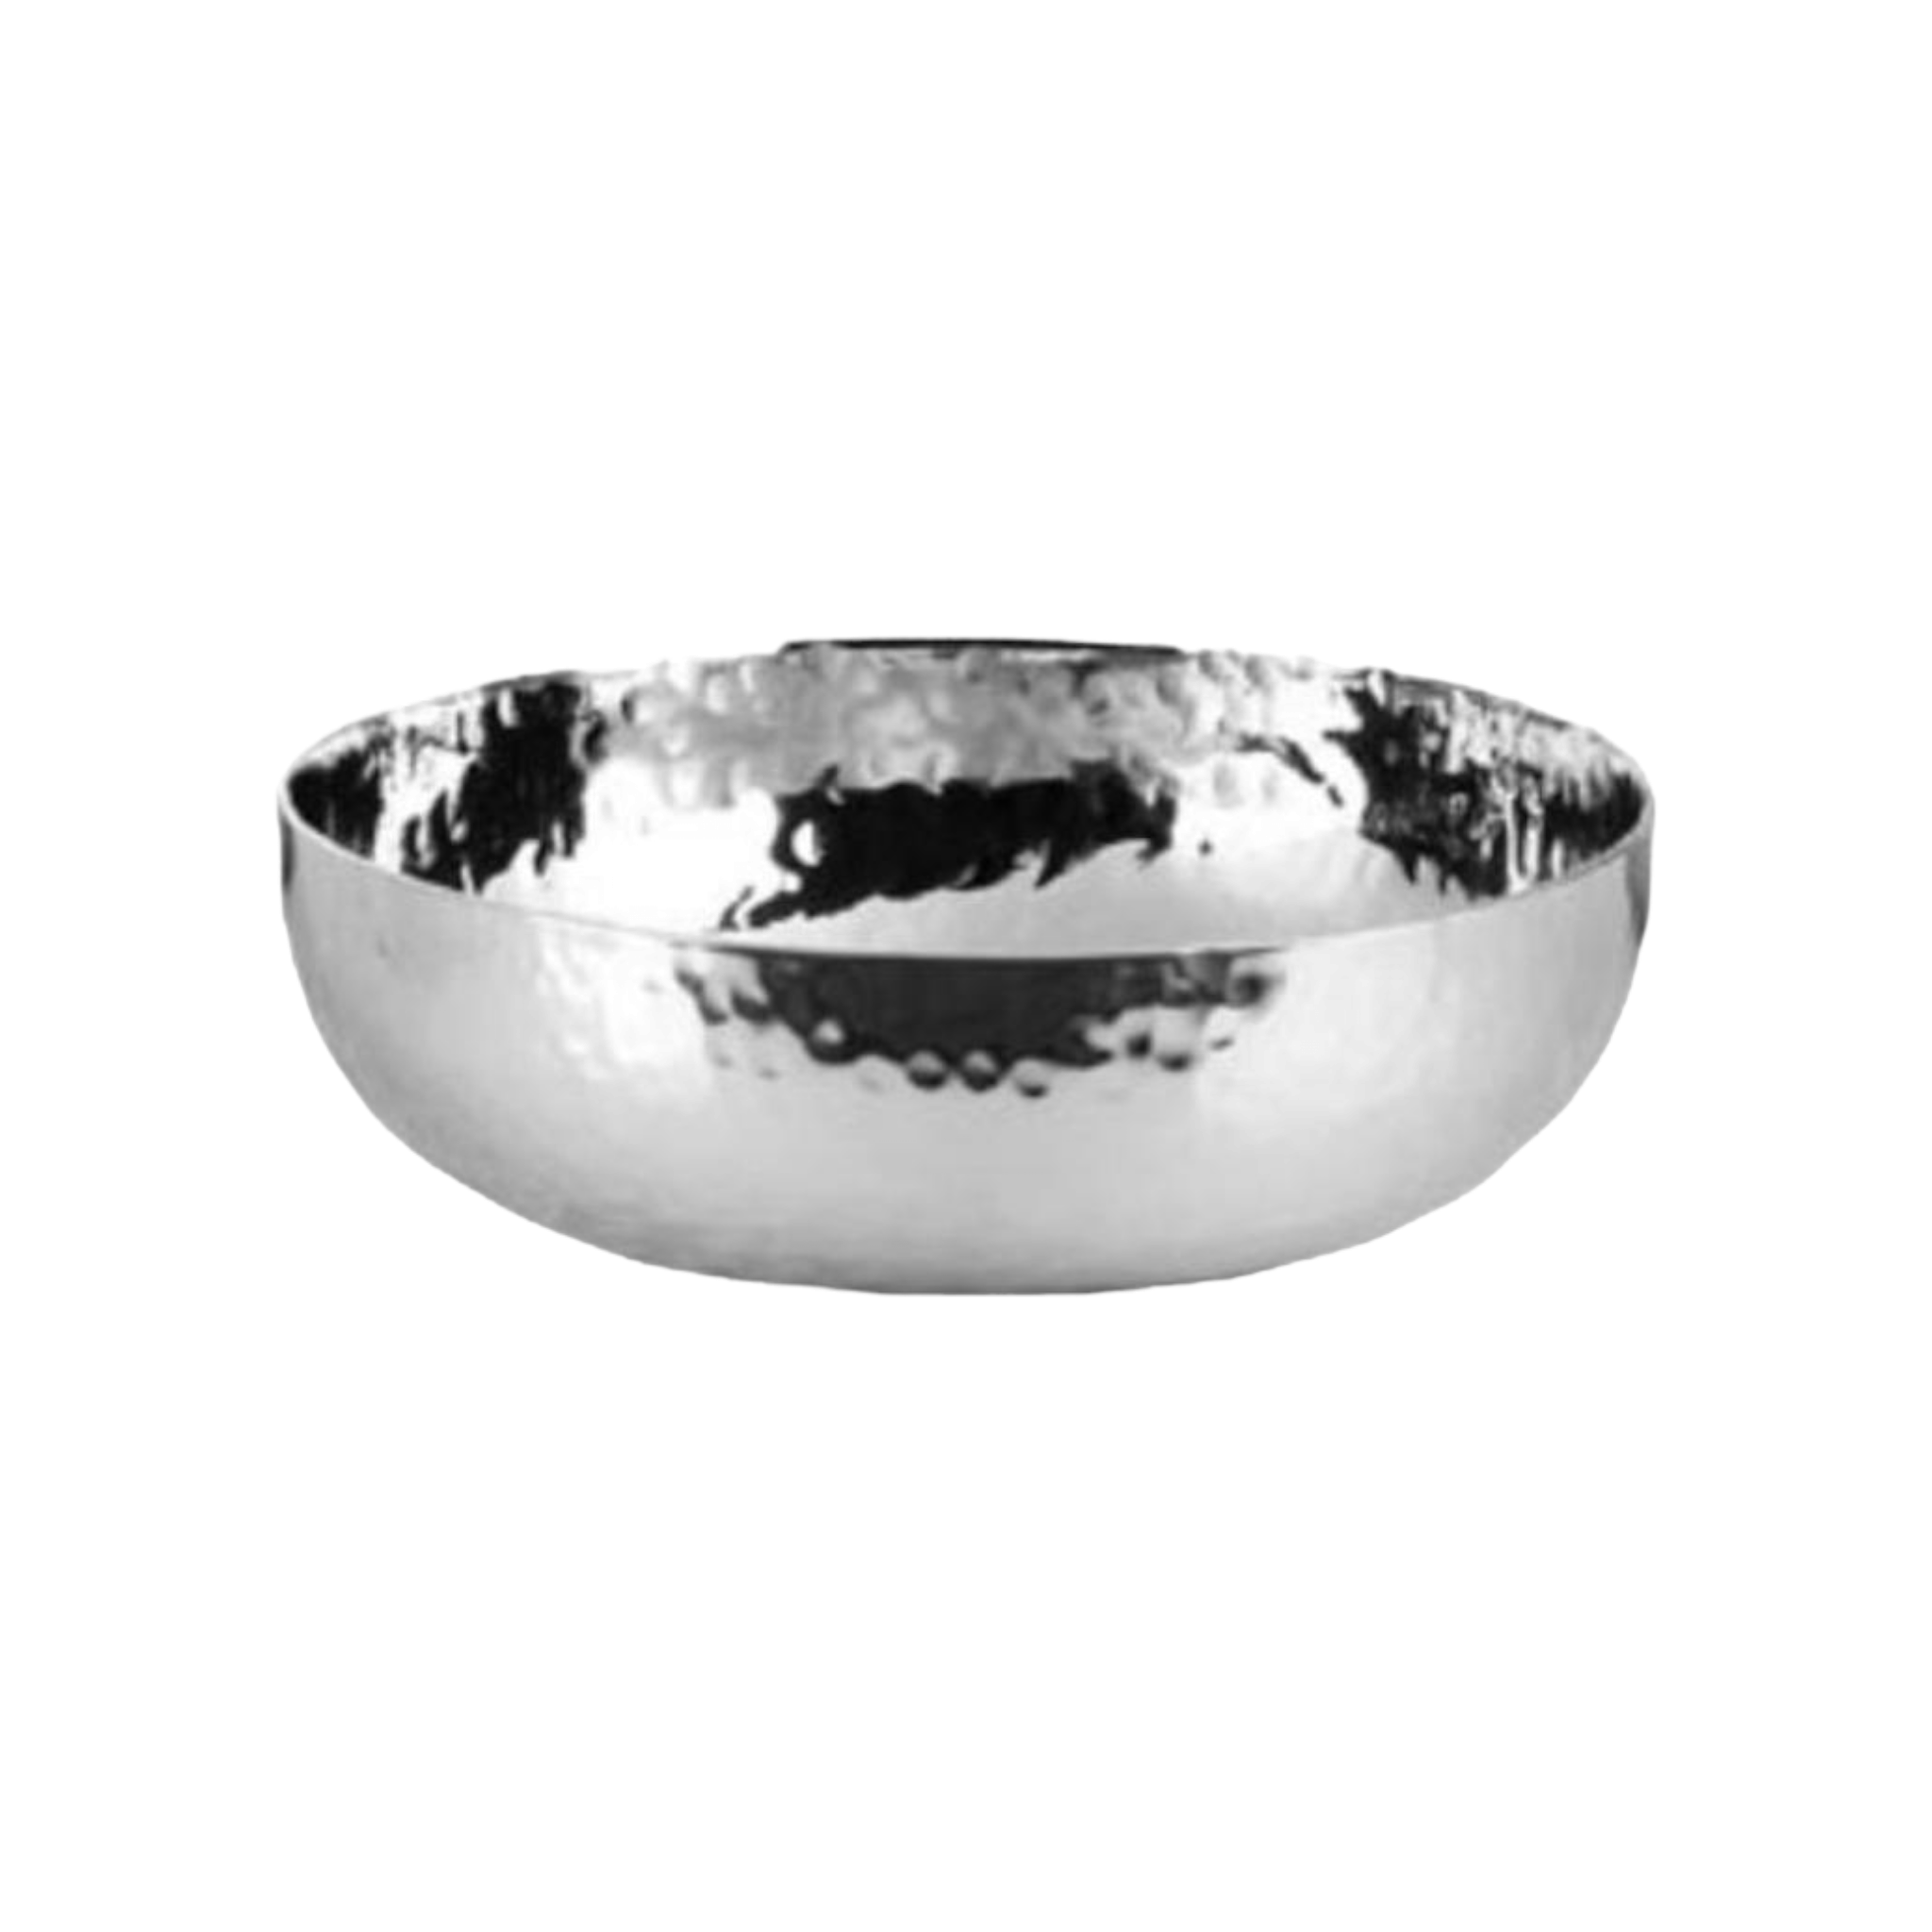 Regent Cookware 230ml Serving Bowl Hammered Stainless Steel